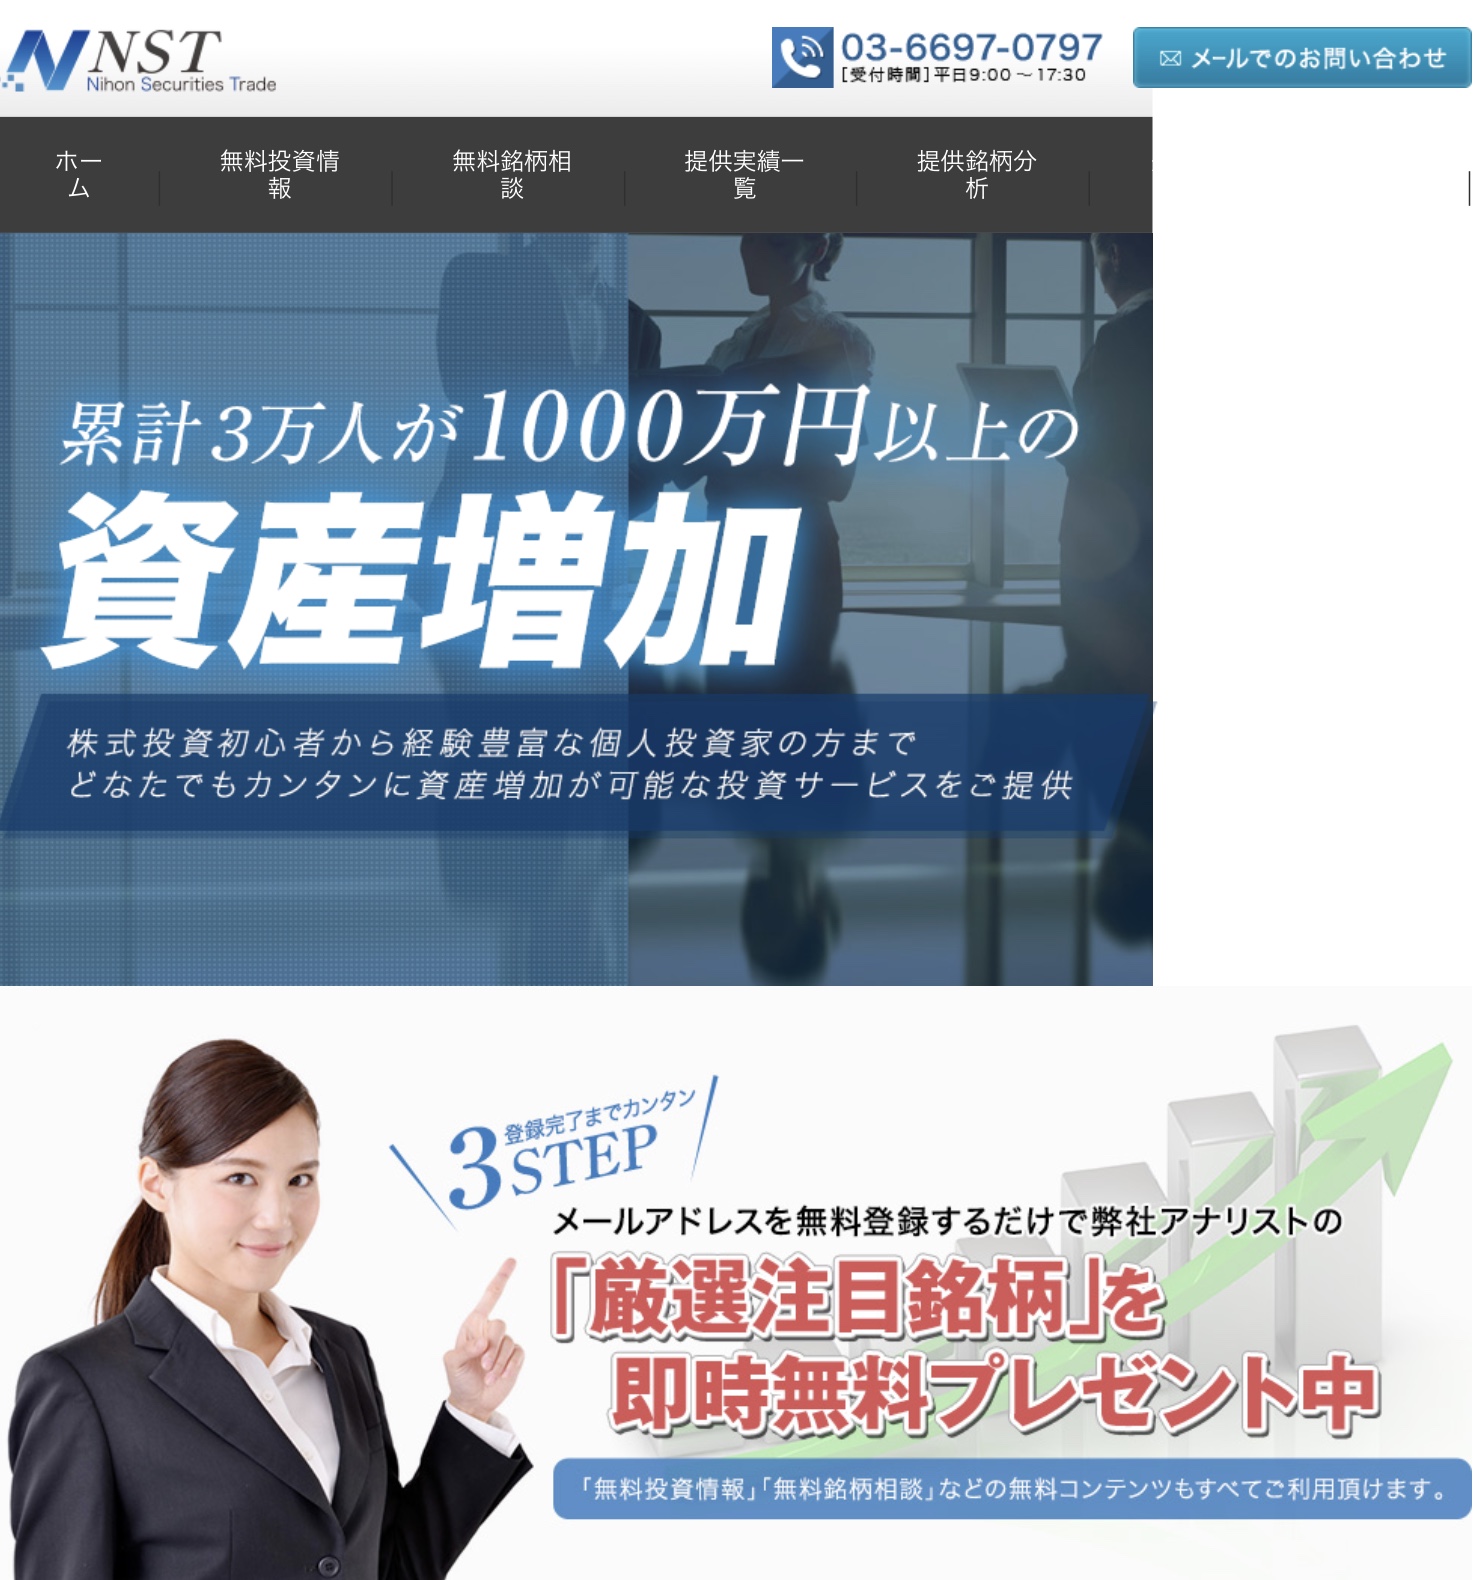 NST ( Nihon Securities Trade ) の評判は？ 自由を求めるブログ